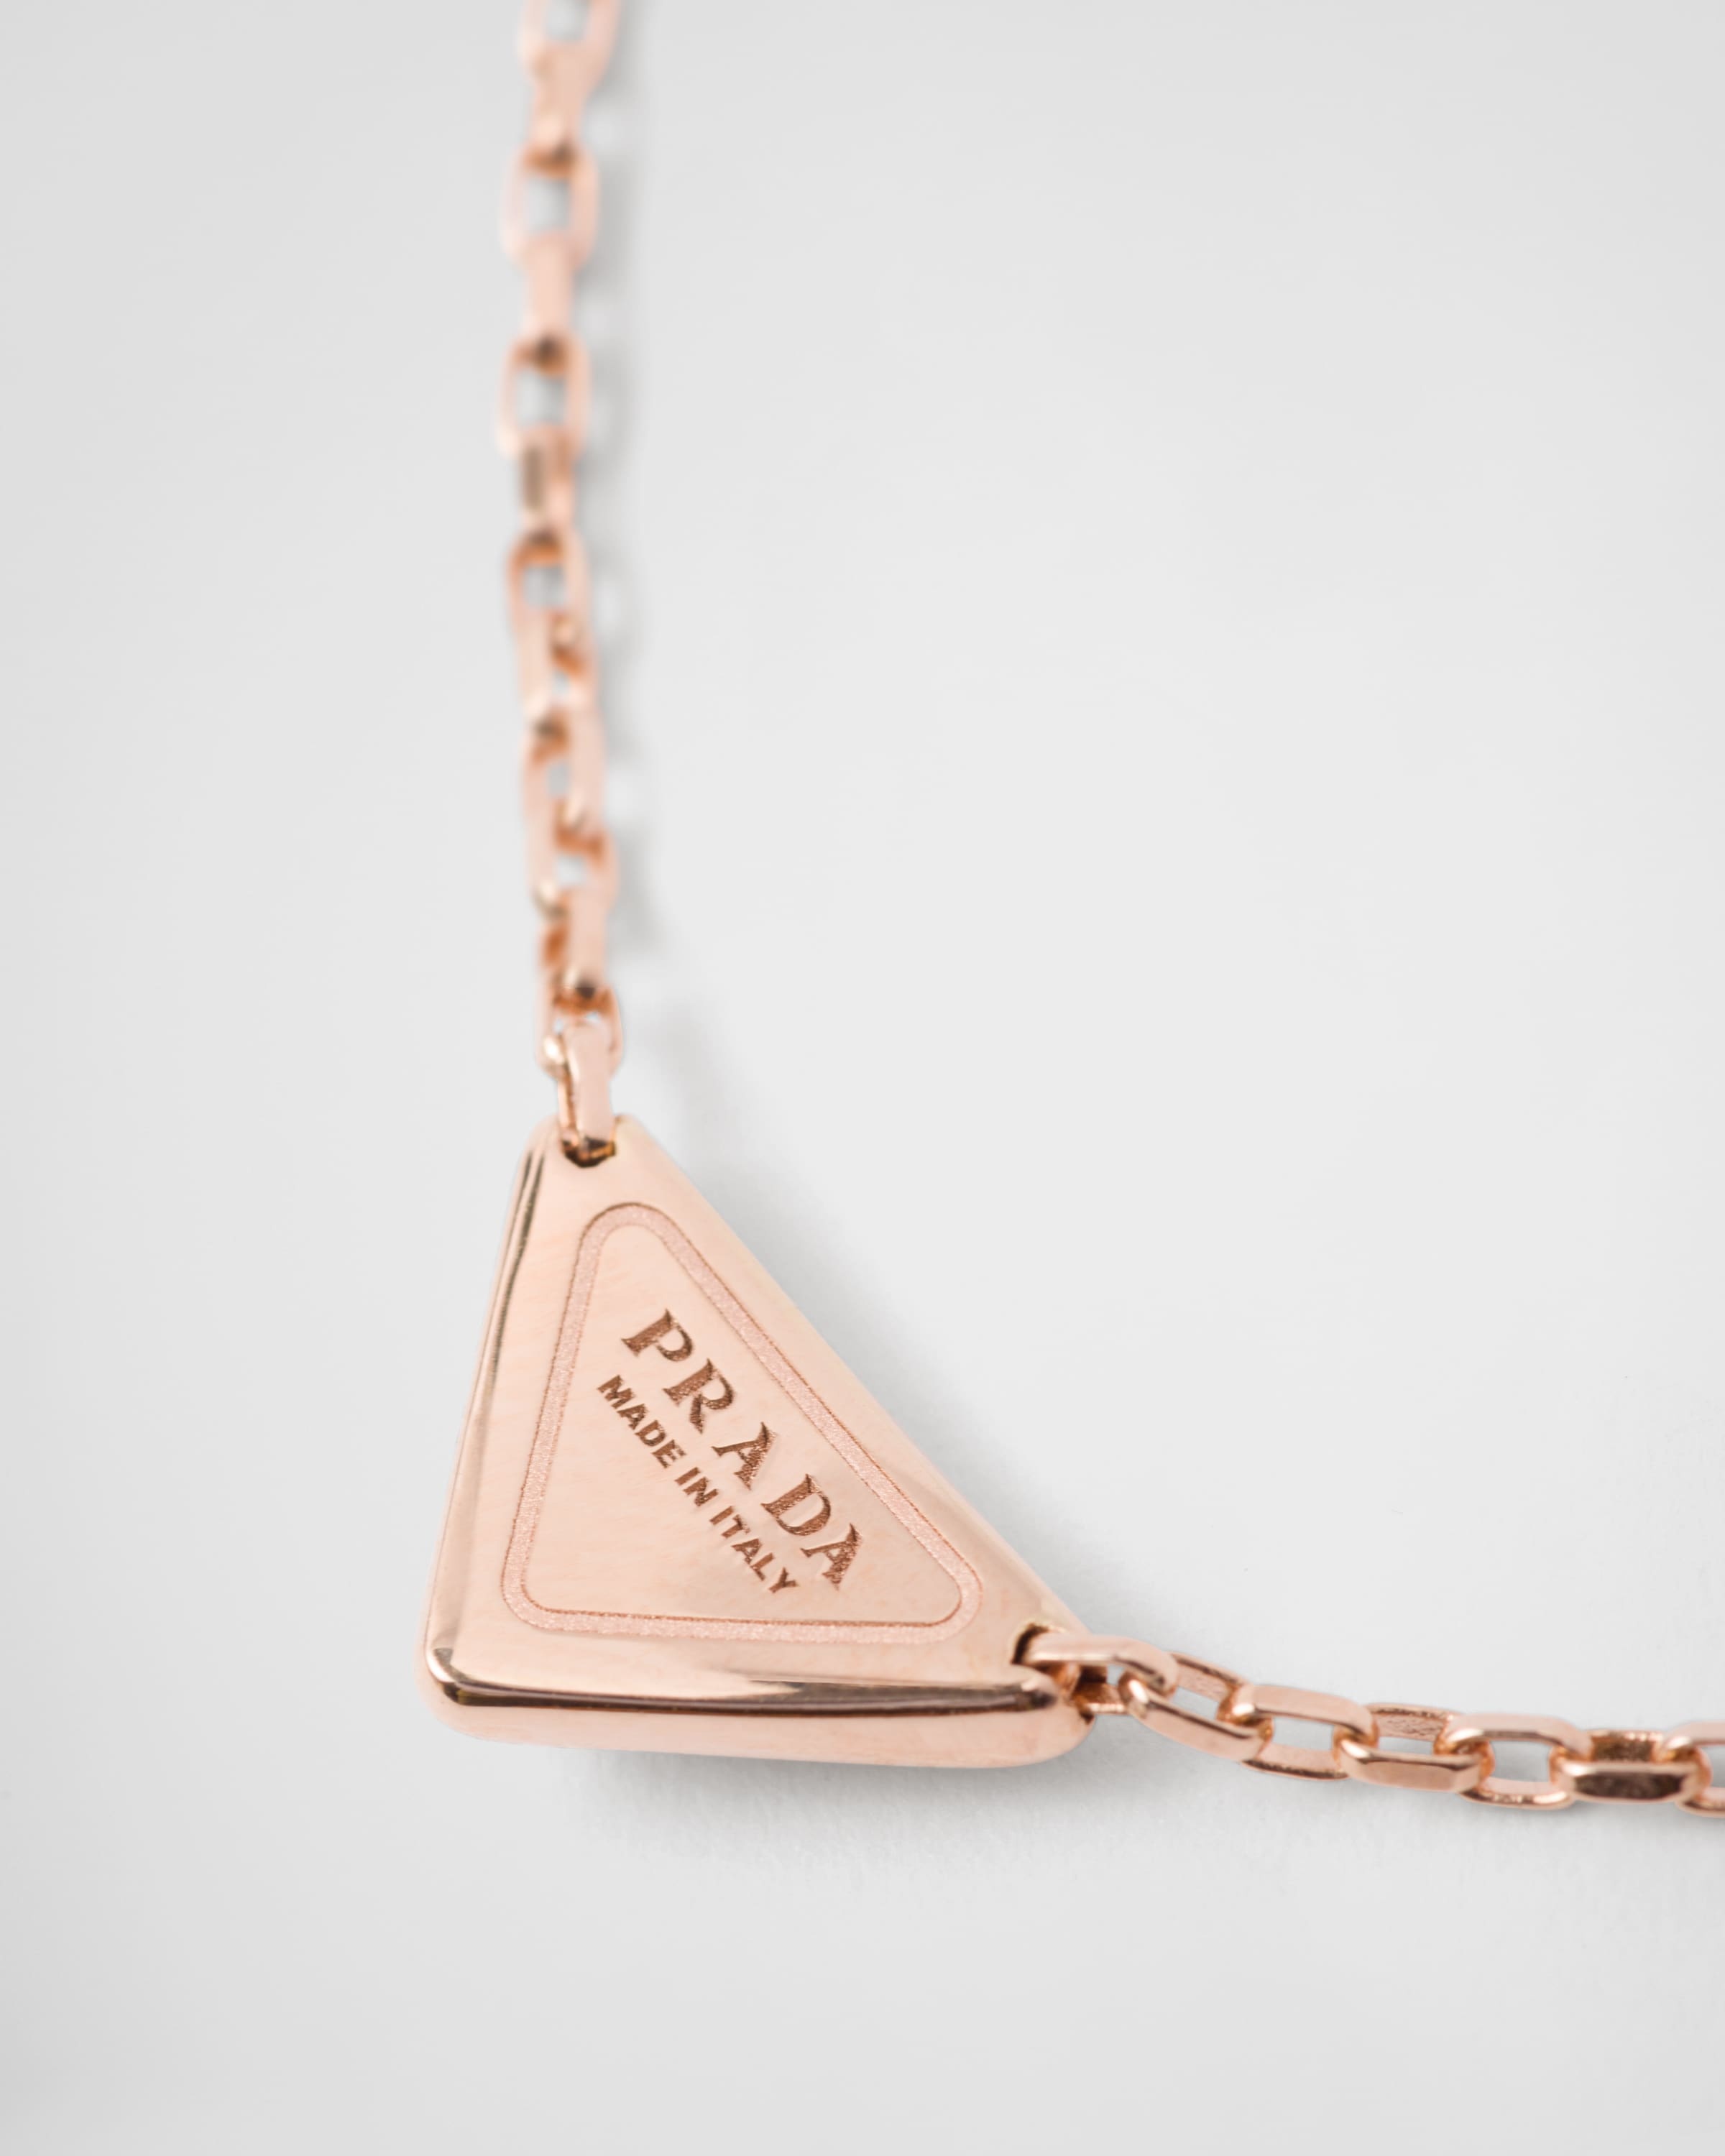 Eternal Gold necklace in pink gold with nano triangle pendant - 4